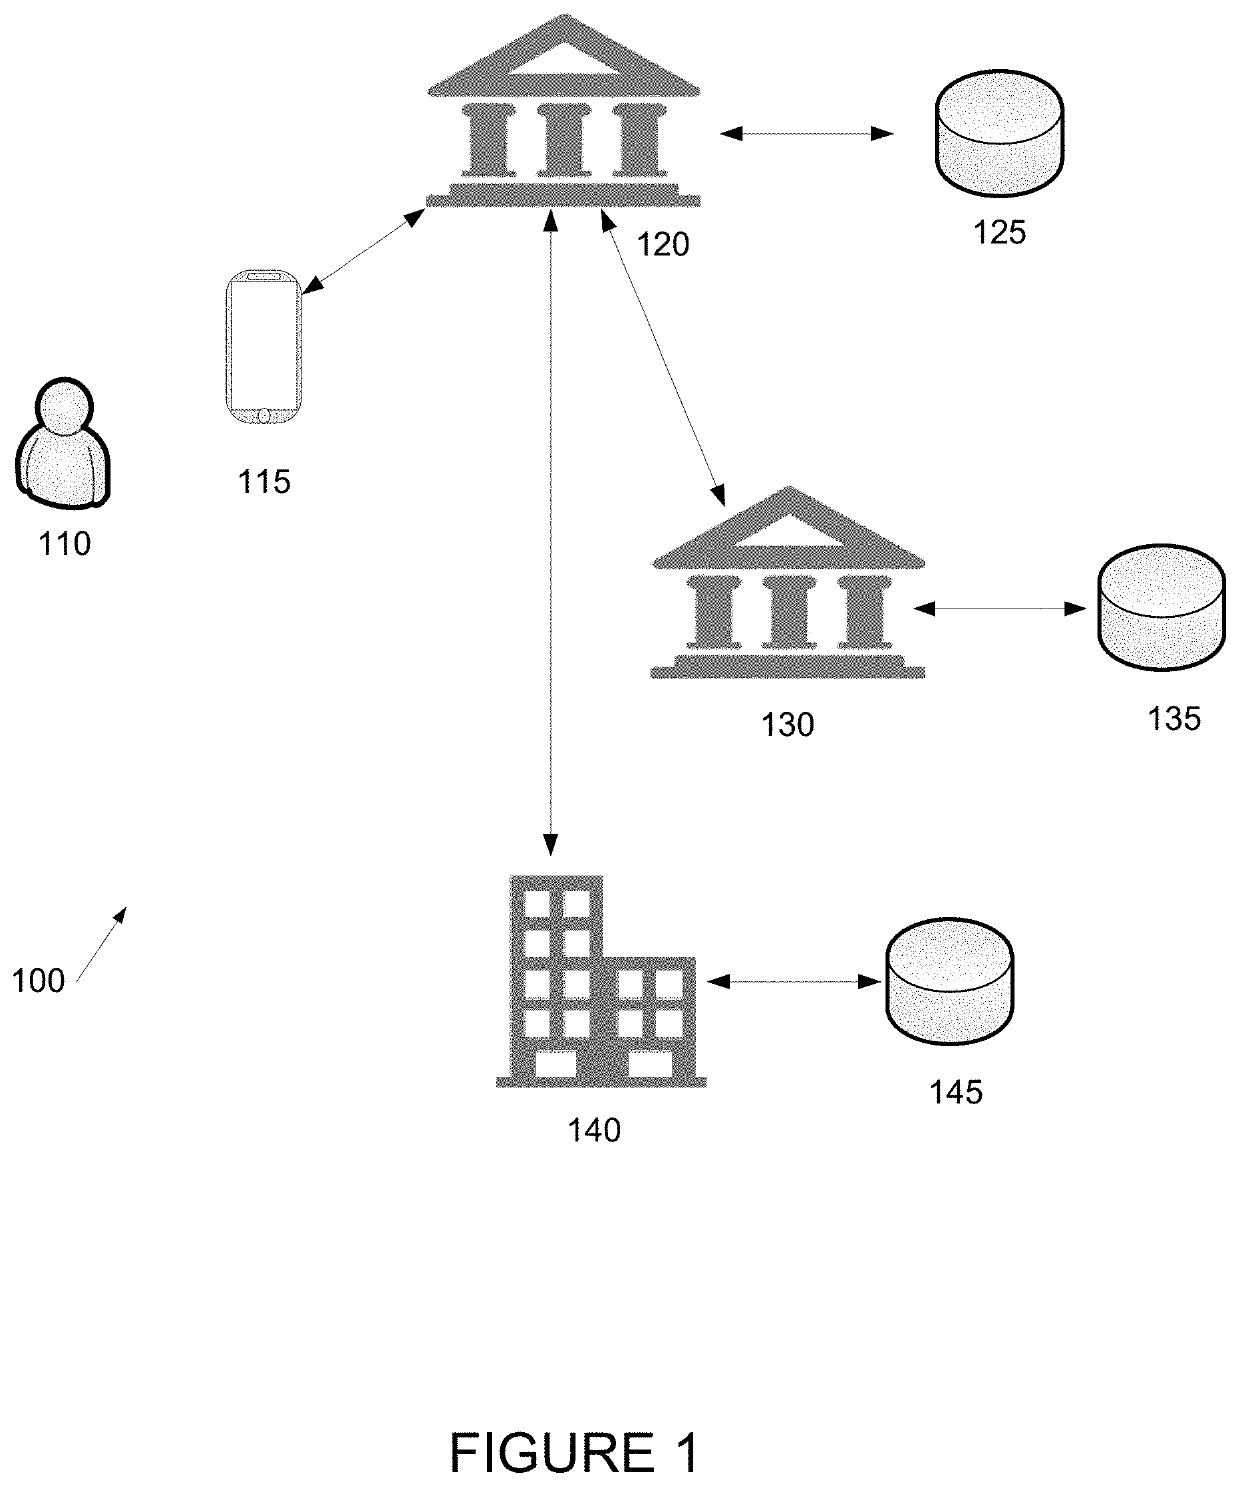 Systems and methods for digital verification of customer information